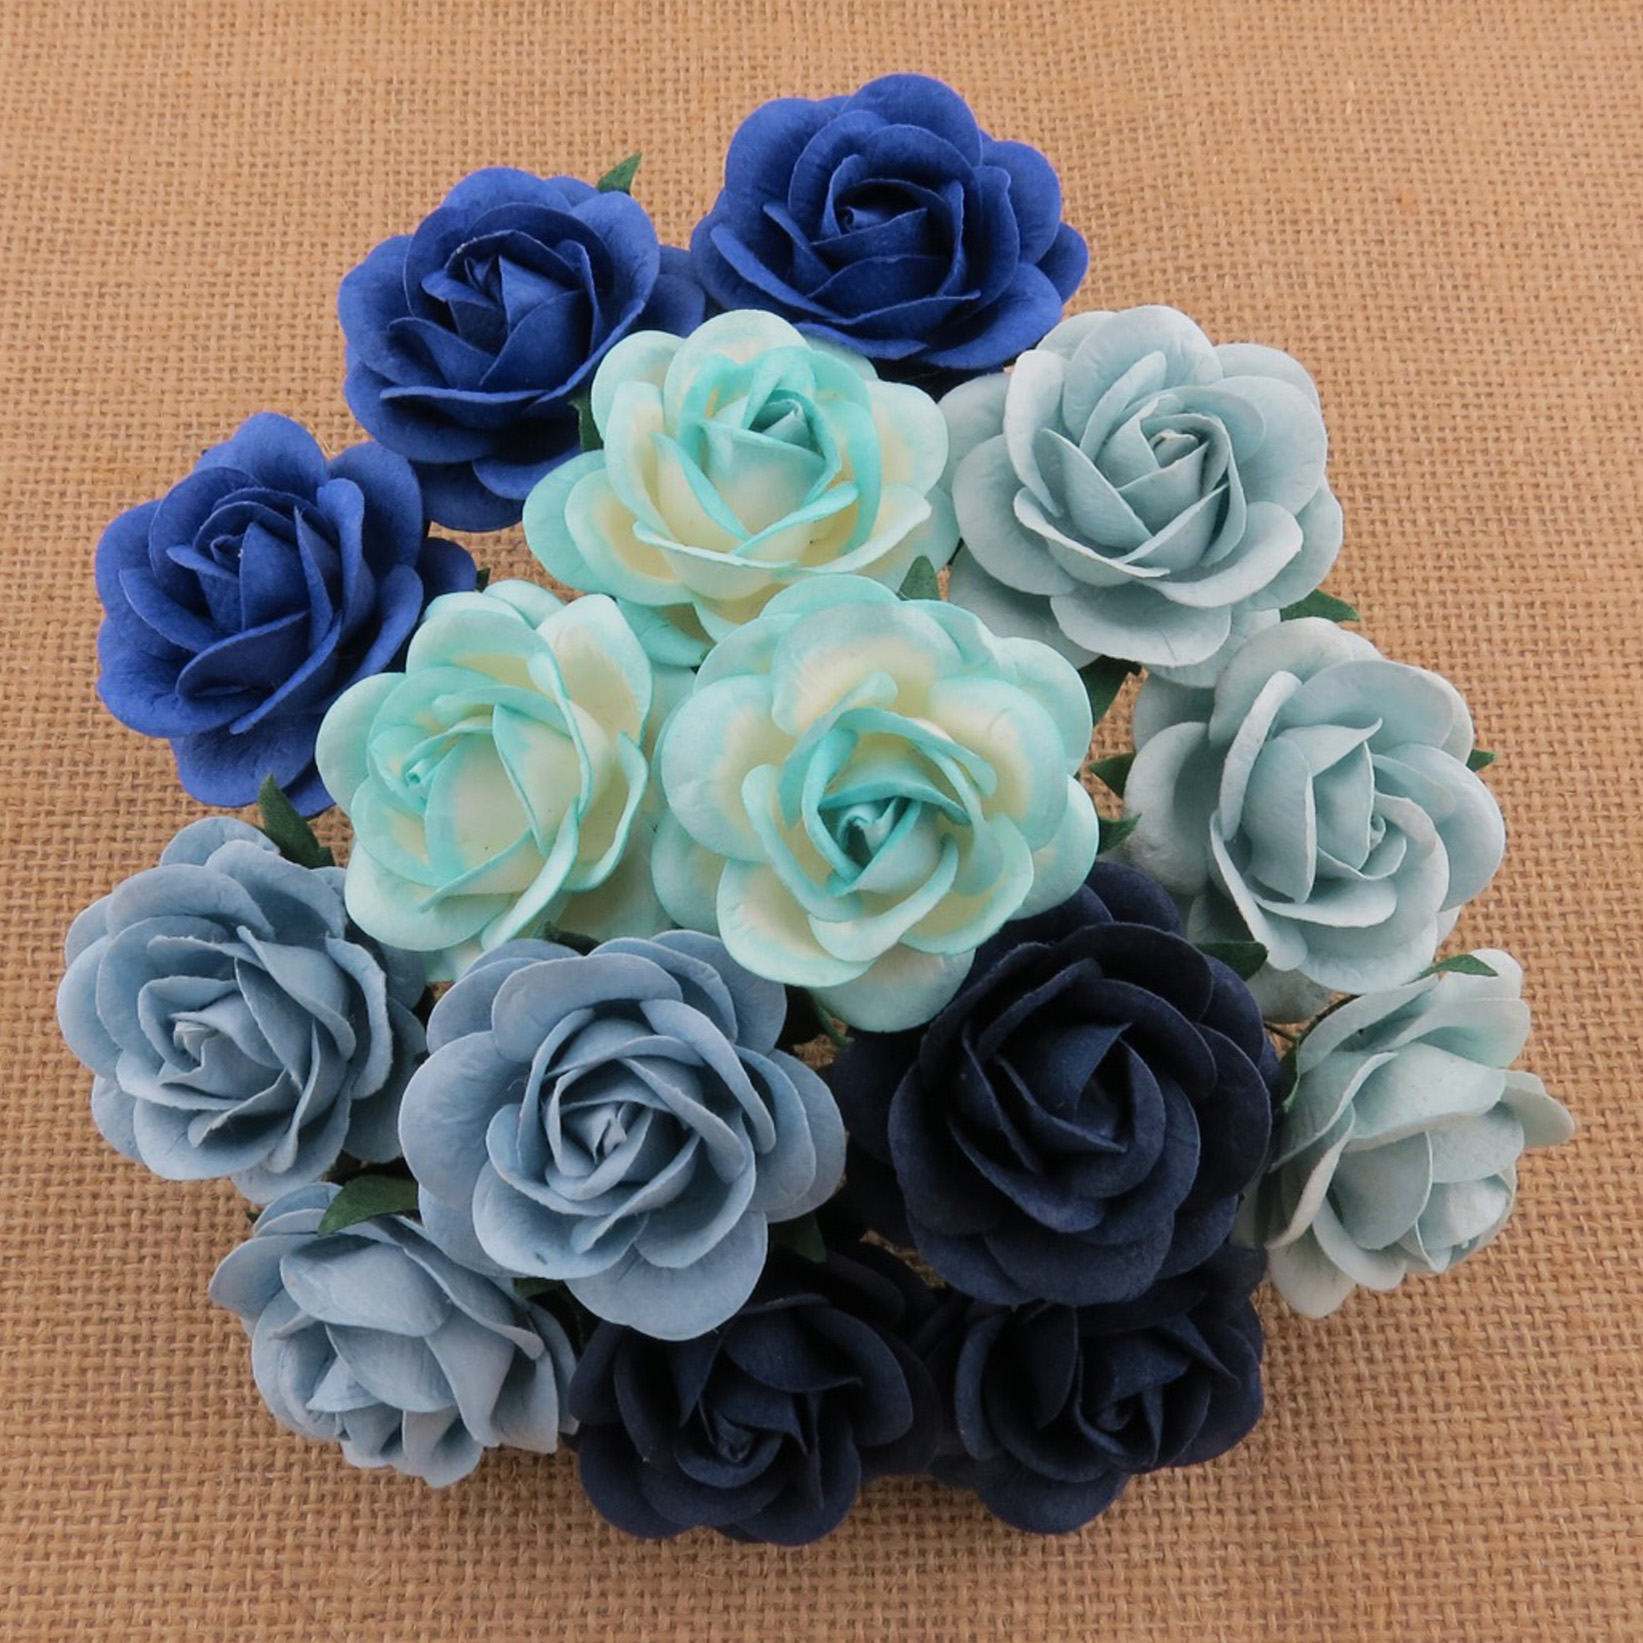 50 MIXED BLUE TONE MULBERRY PAPER TRELLIS ROSES - 5 COLOR